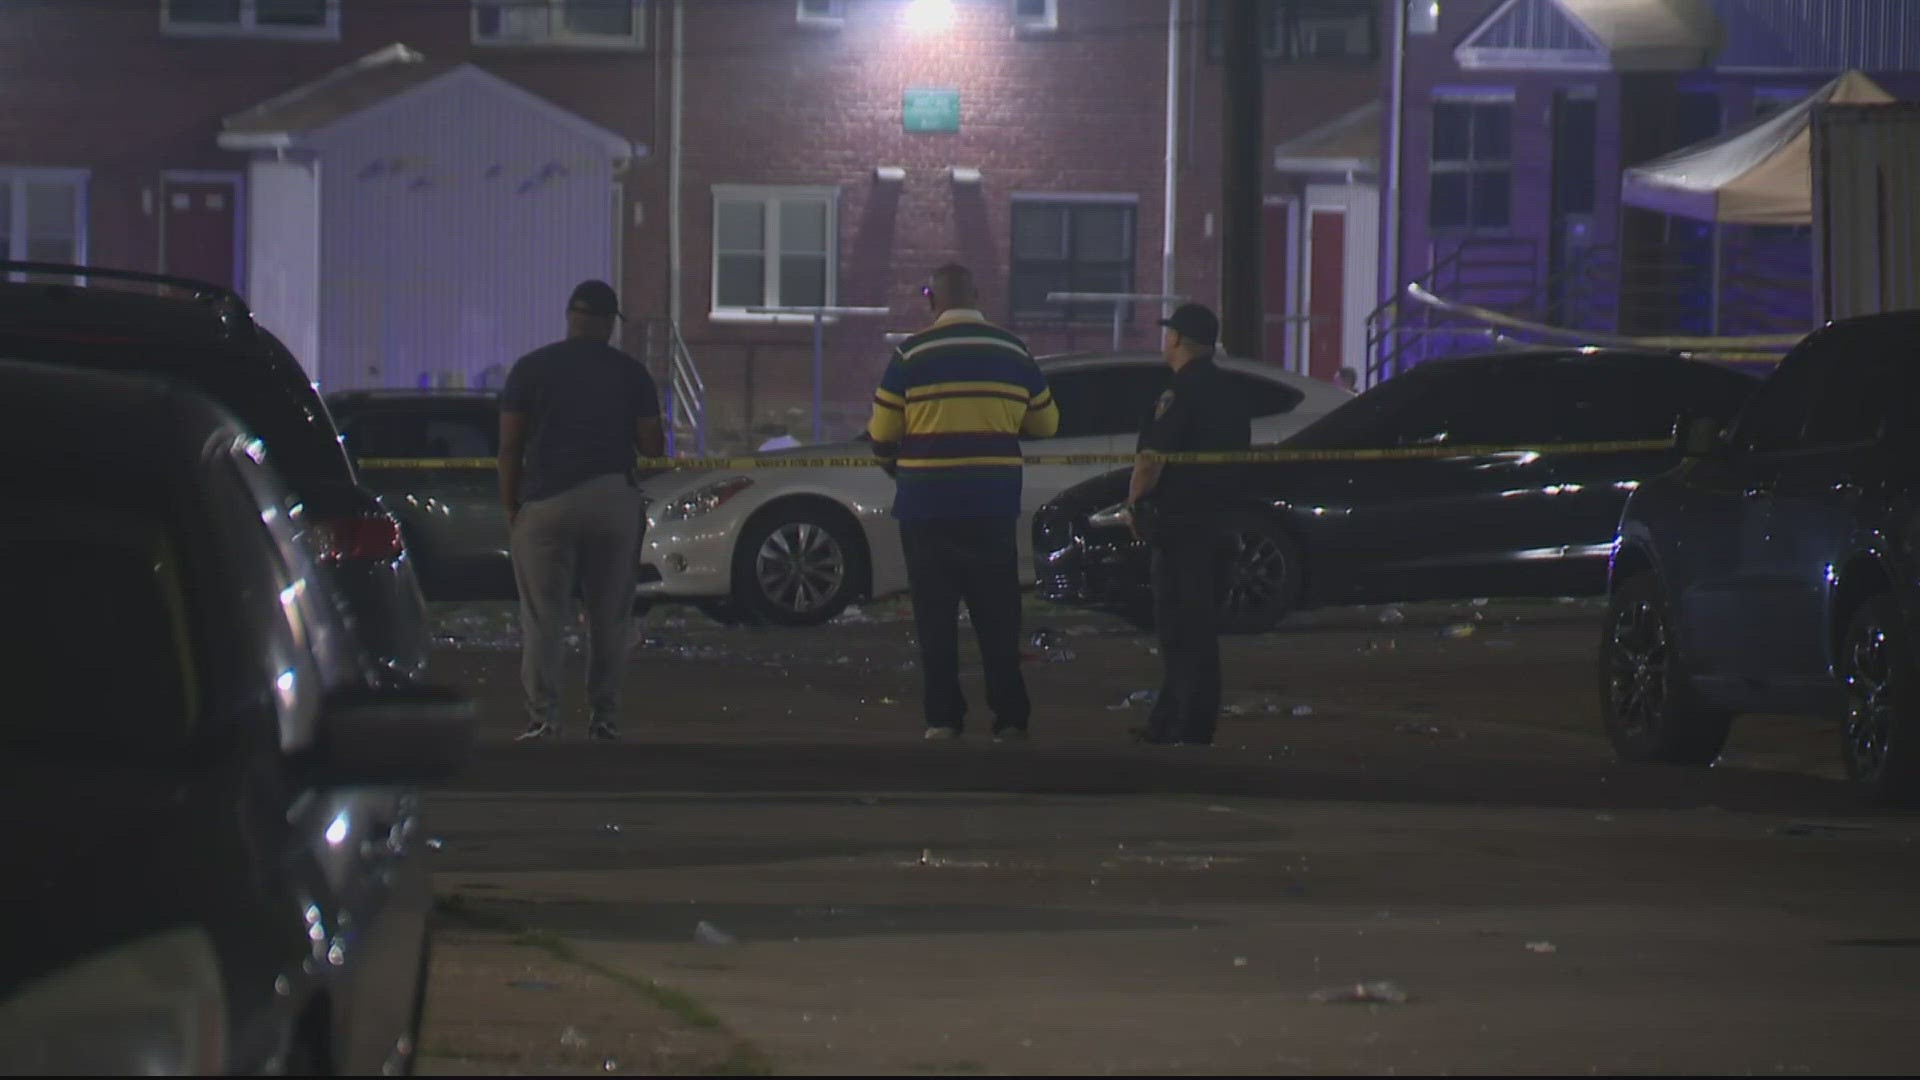 A 18-year-old woman and a 20-year-old man were killed in a shooting at a block party in Baltimore. Twenty-eight others were injured, including three critically.